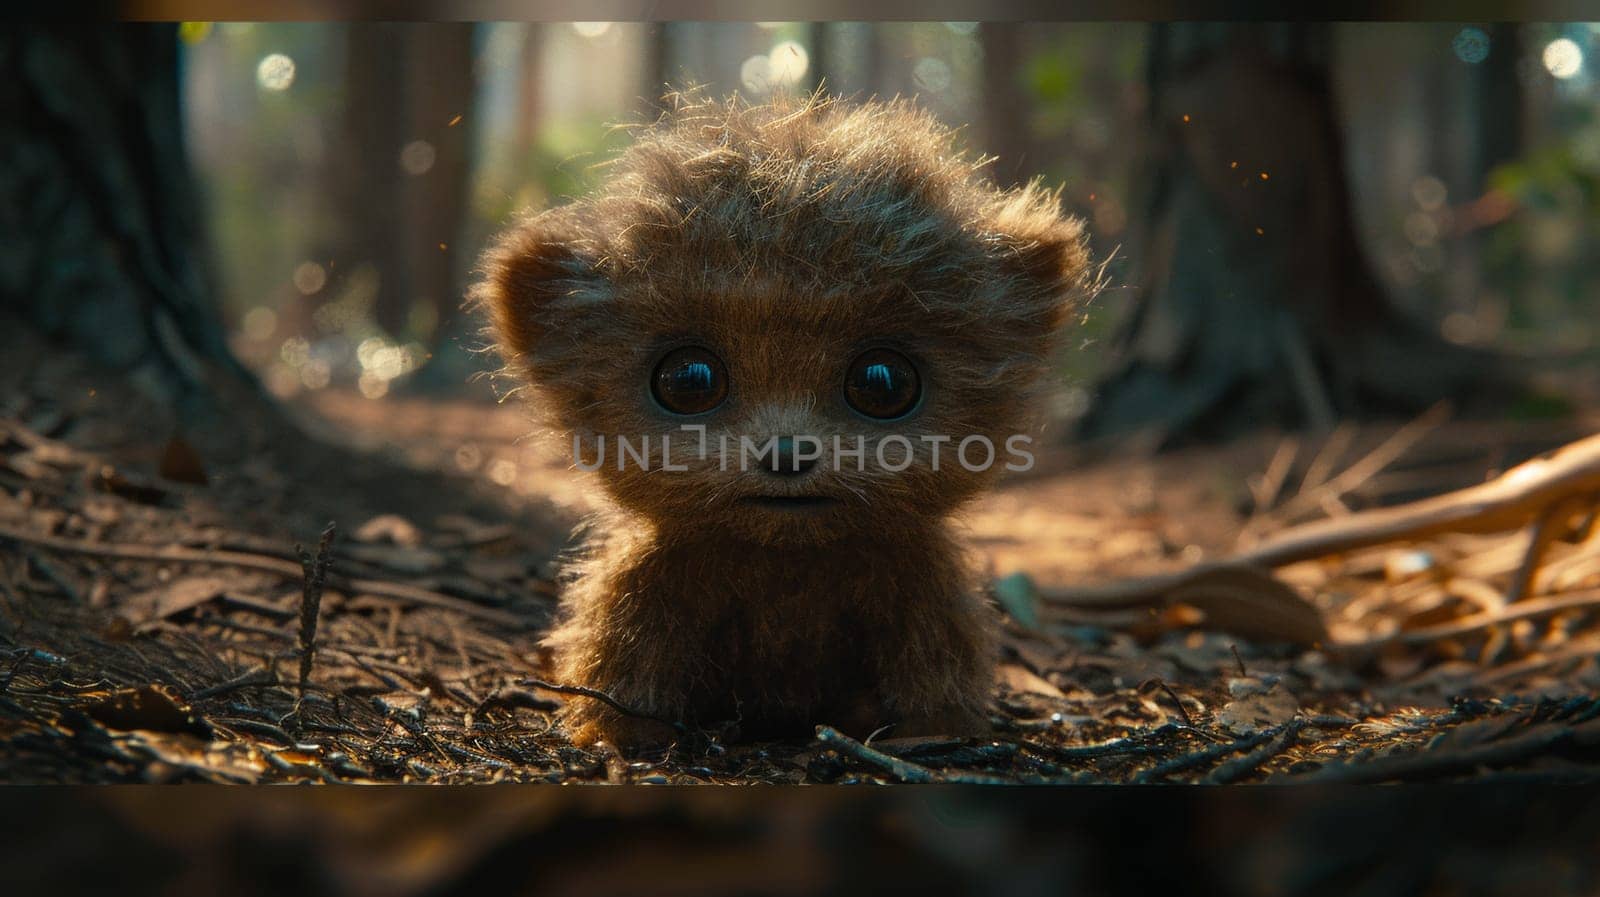 A small brown teddy bear sitting in the middle of a forest